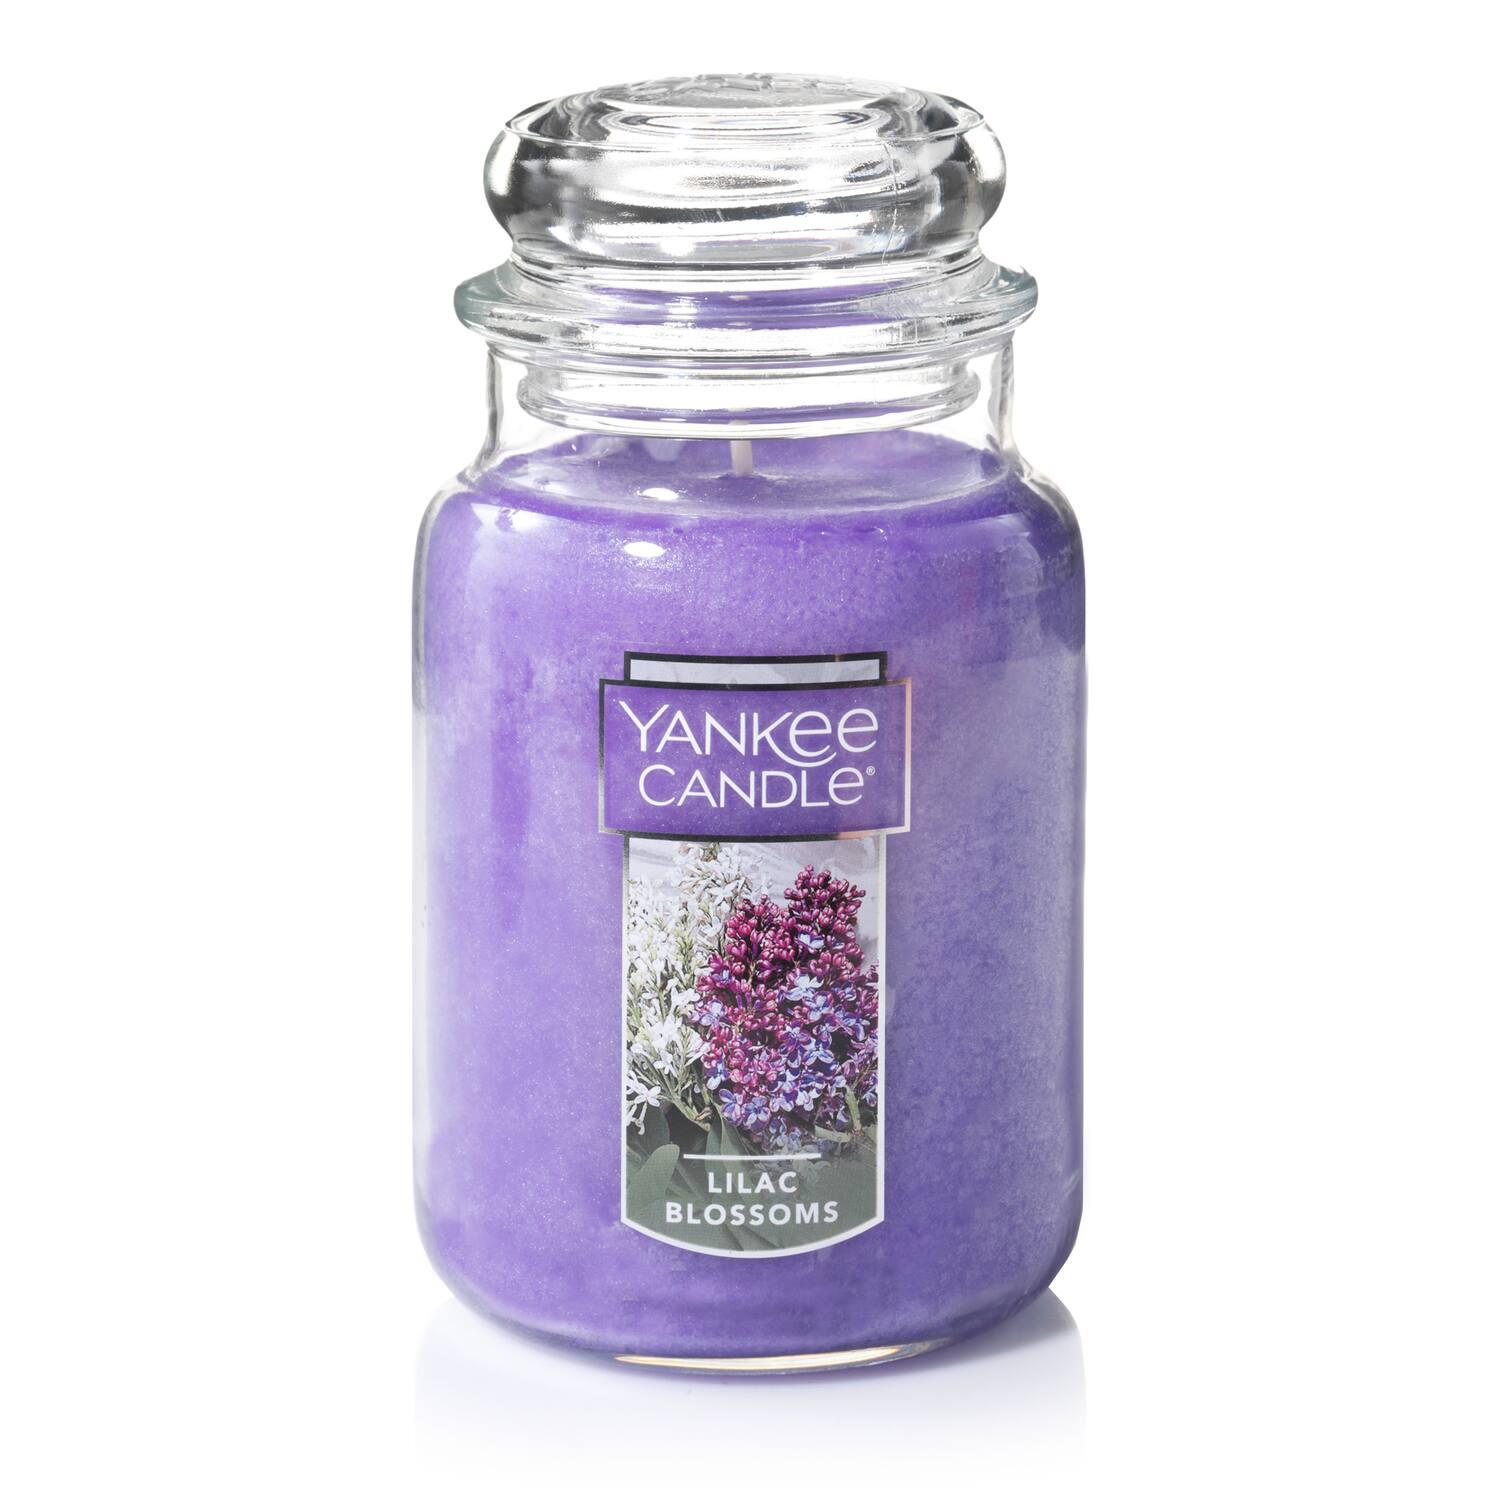 10 Yankee Candle Large Jars for $63.70 Shipped